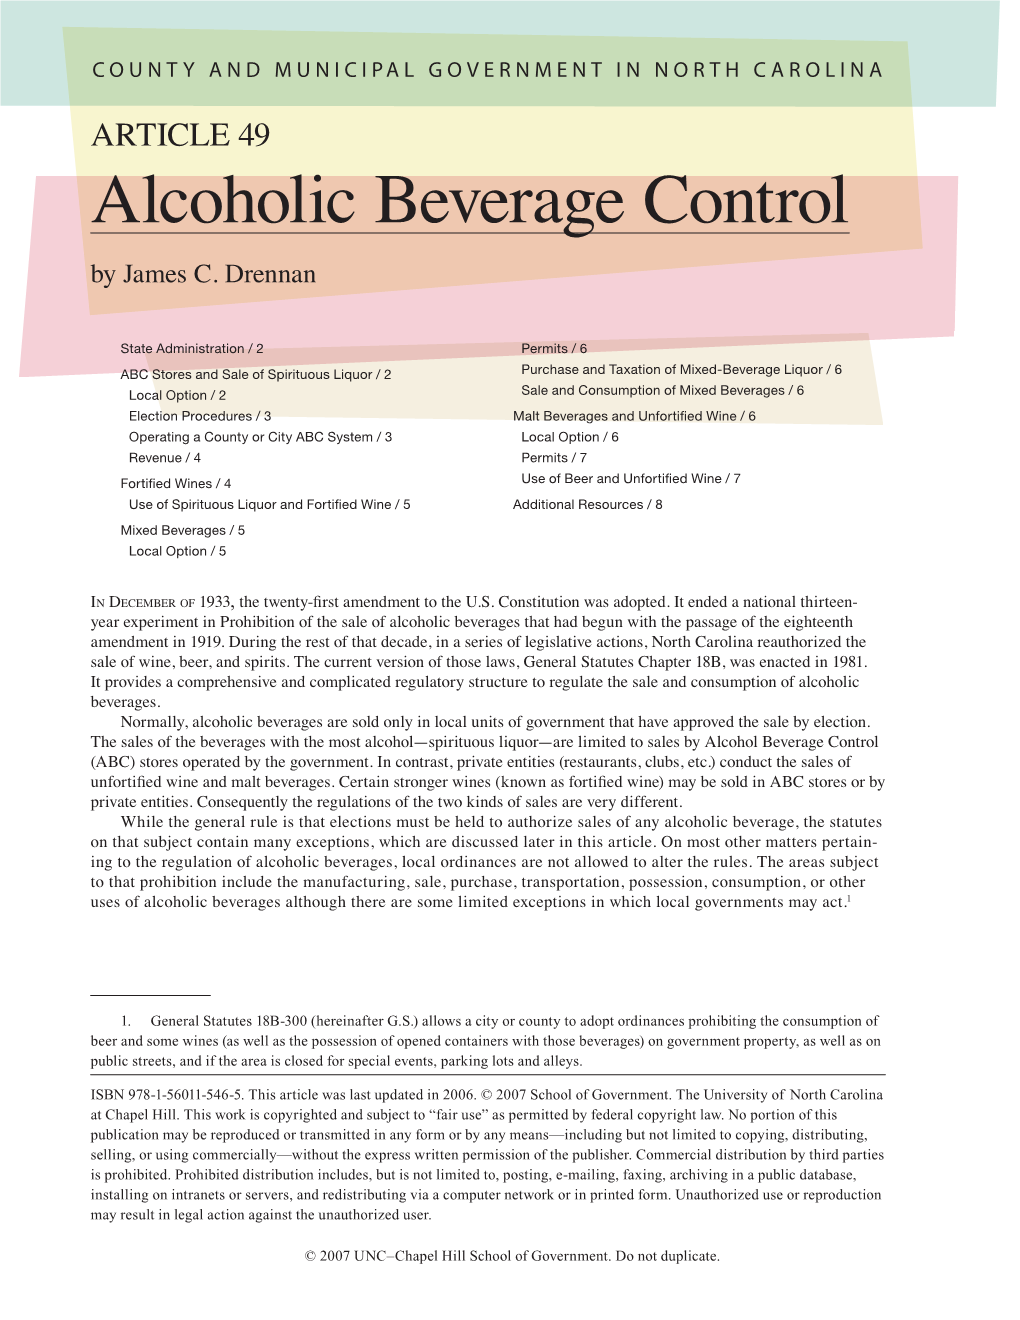 Alcoholic Beverage Control by James C